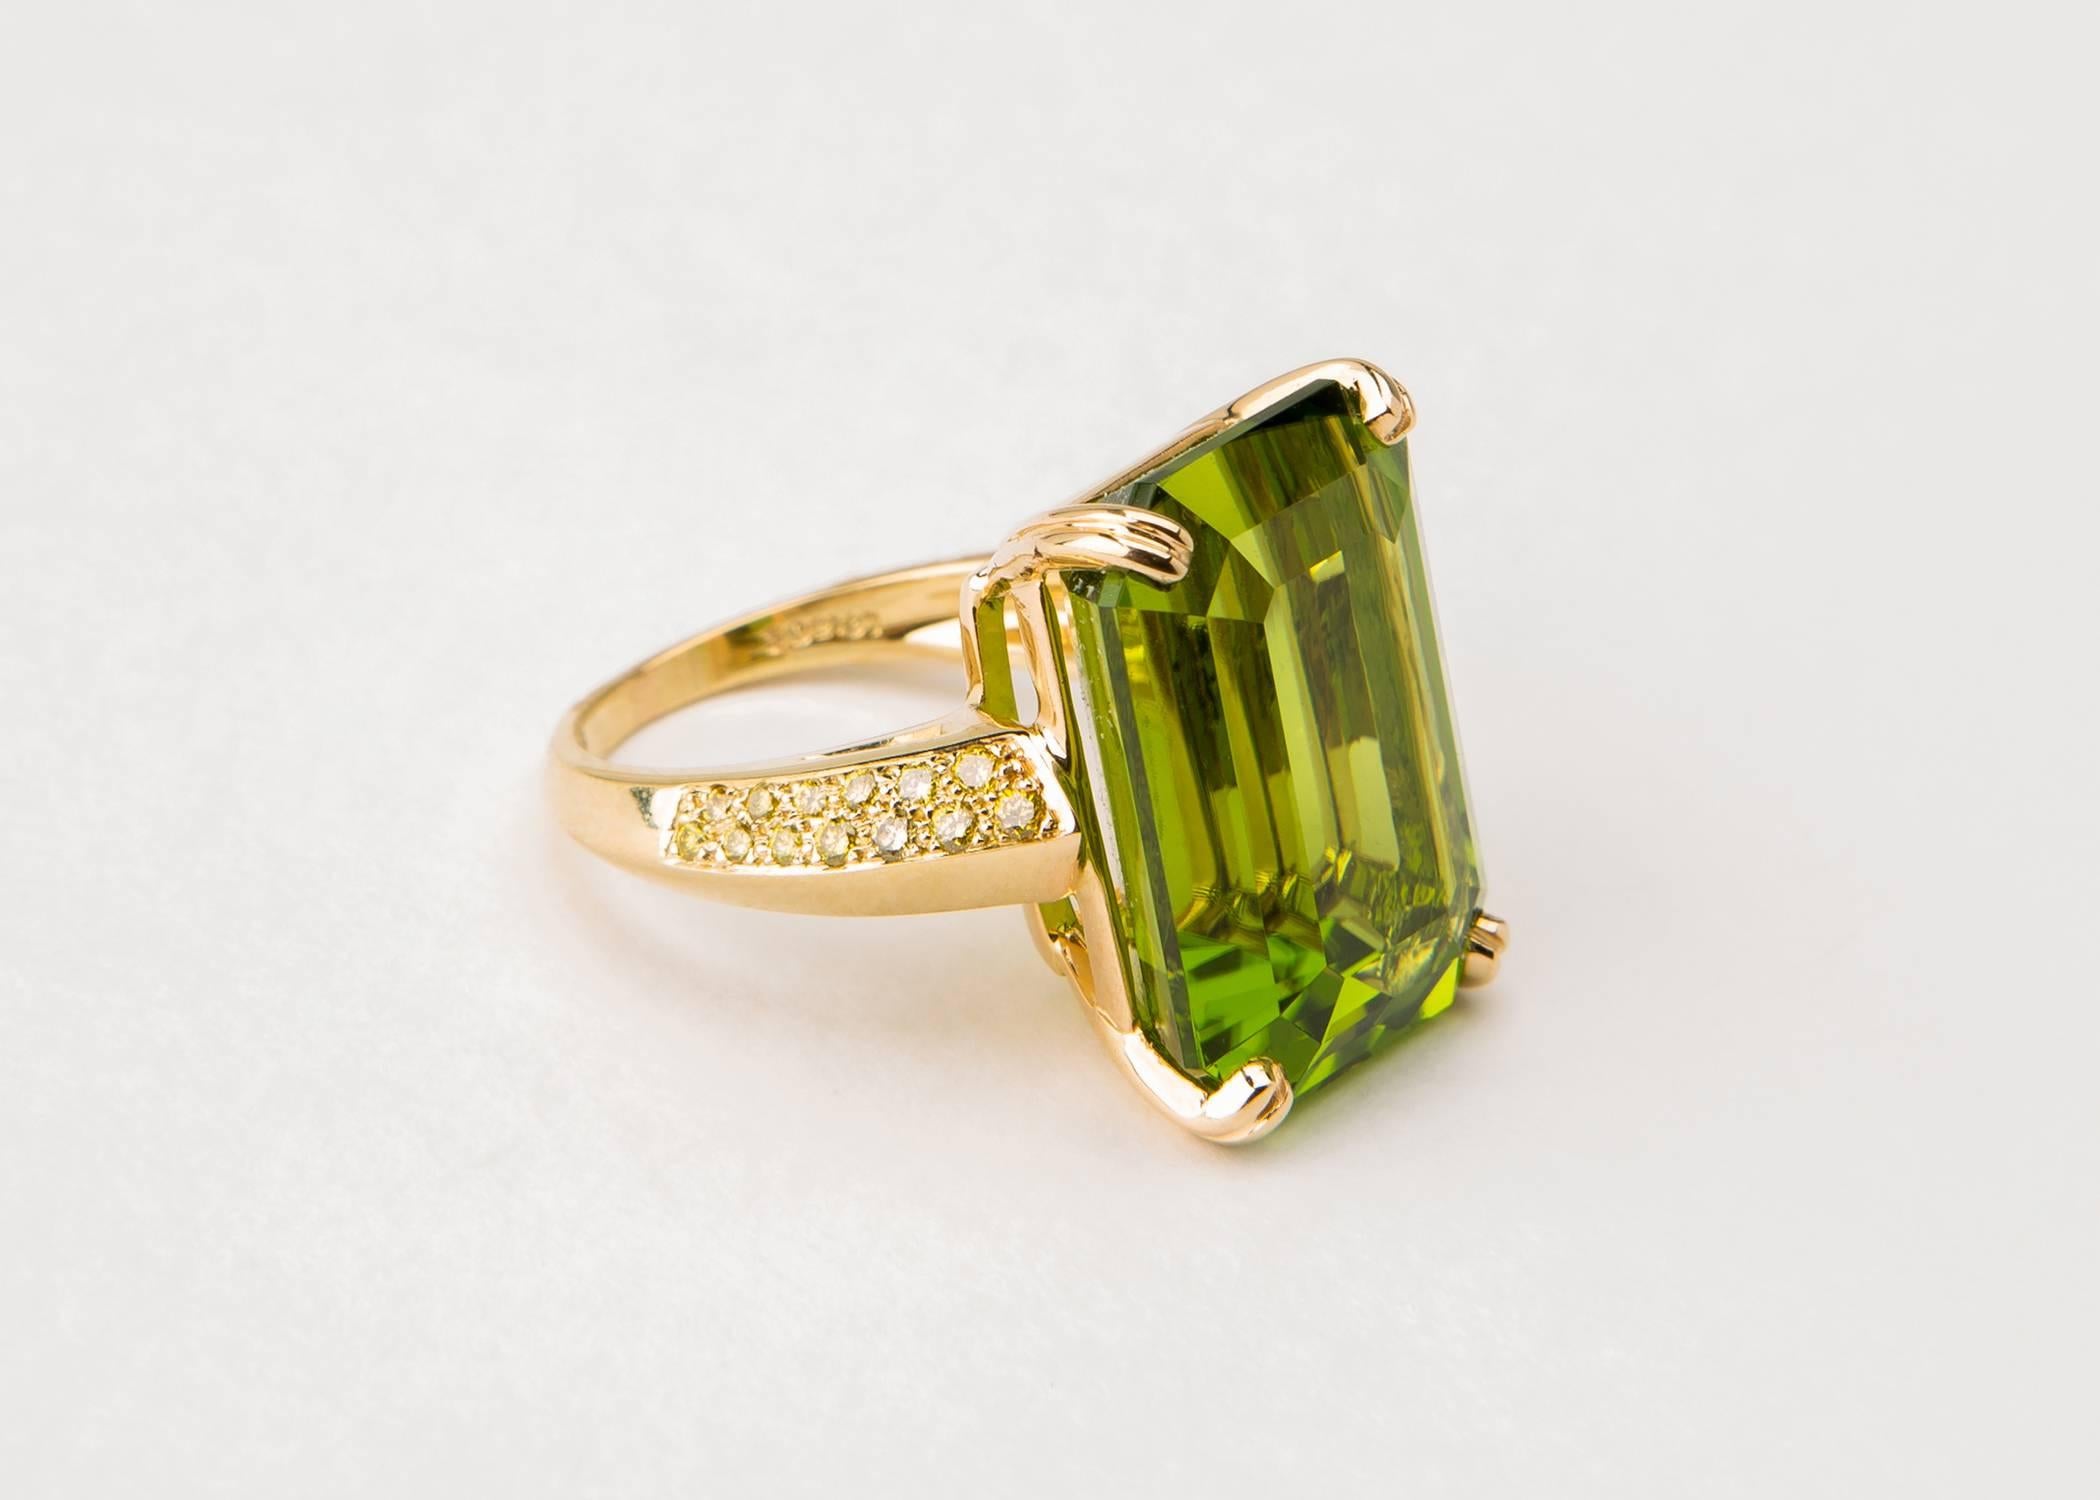 A spectacular 25 carat peridot is accented with fancy yellow diamonds in a simple geometric mounting created by Oscar Heyman. Please see additional image for mounting details.